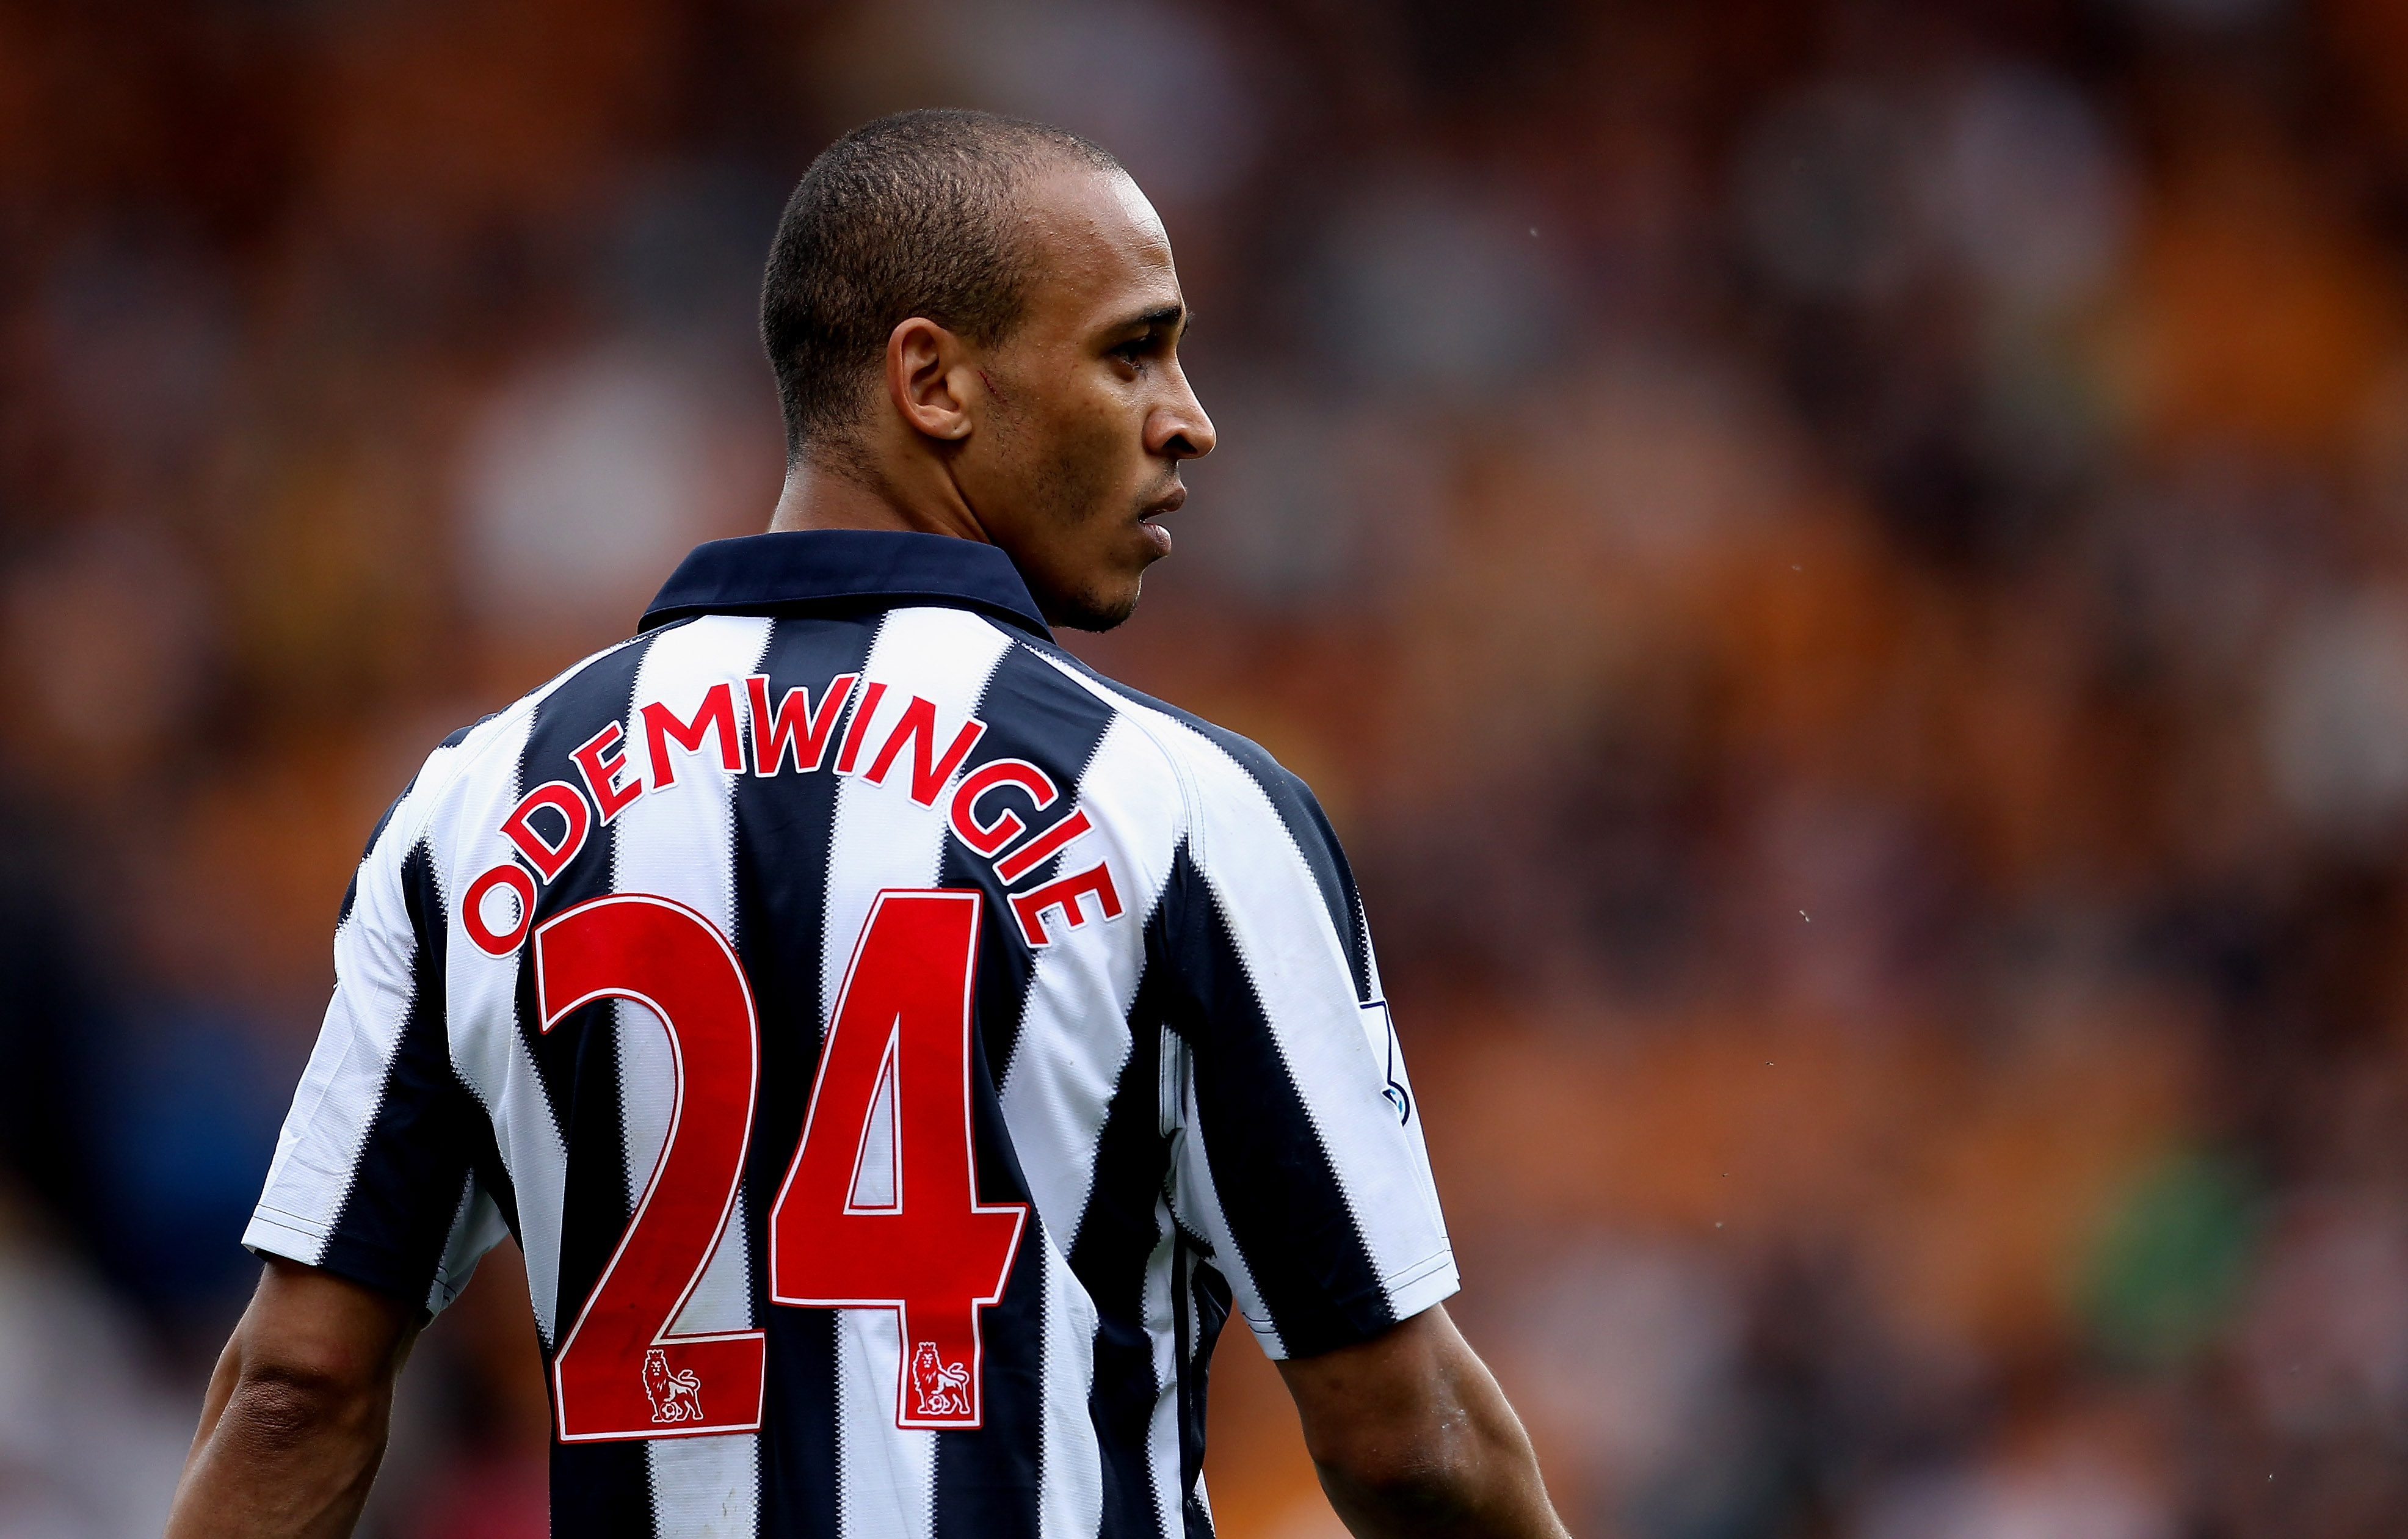 WOLVERHAMPTON, ENGLAND - MAY 08:  Peter Odemwingie of WBA during the Barclays Premier League match between Wolverhampton Wanderers and West Bromwich Albion at Molineux on May 8, 2011 in Wolverhampton, England.  (Photo by Scott Heavey/Getty Images)